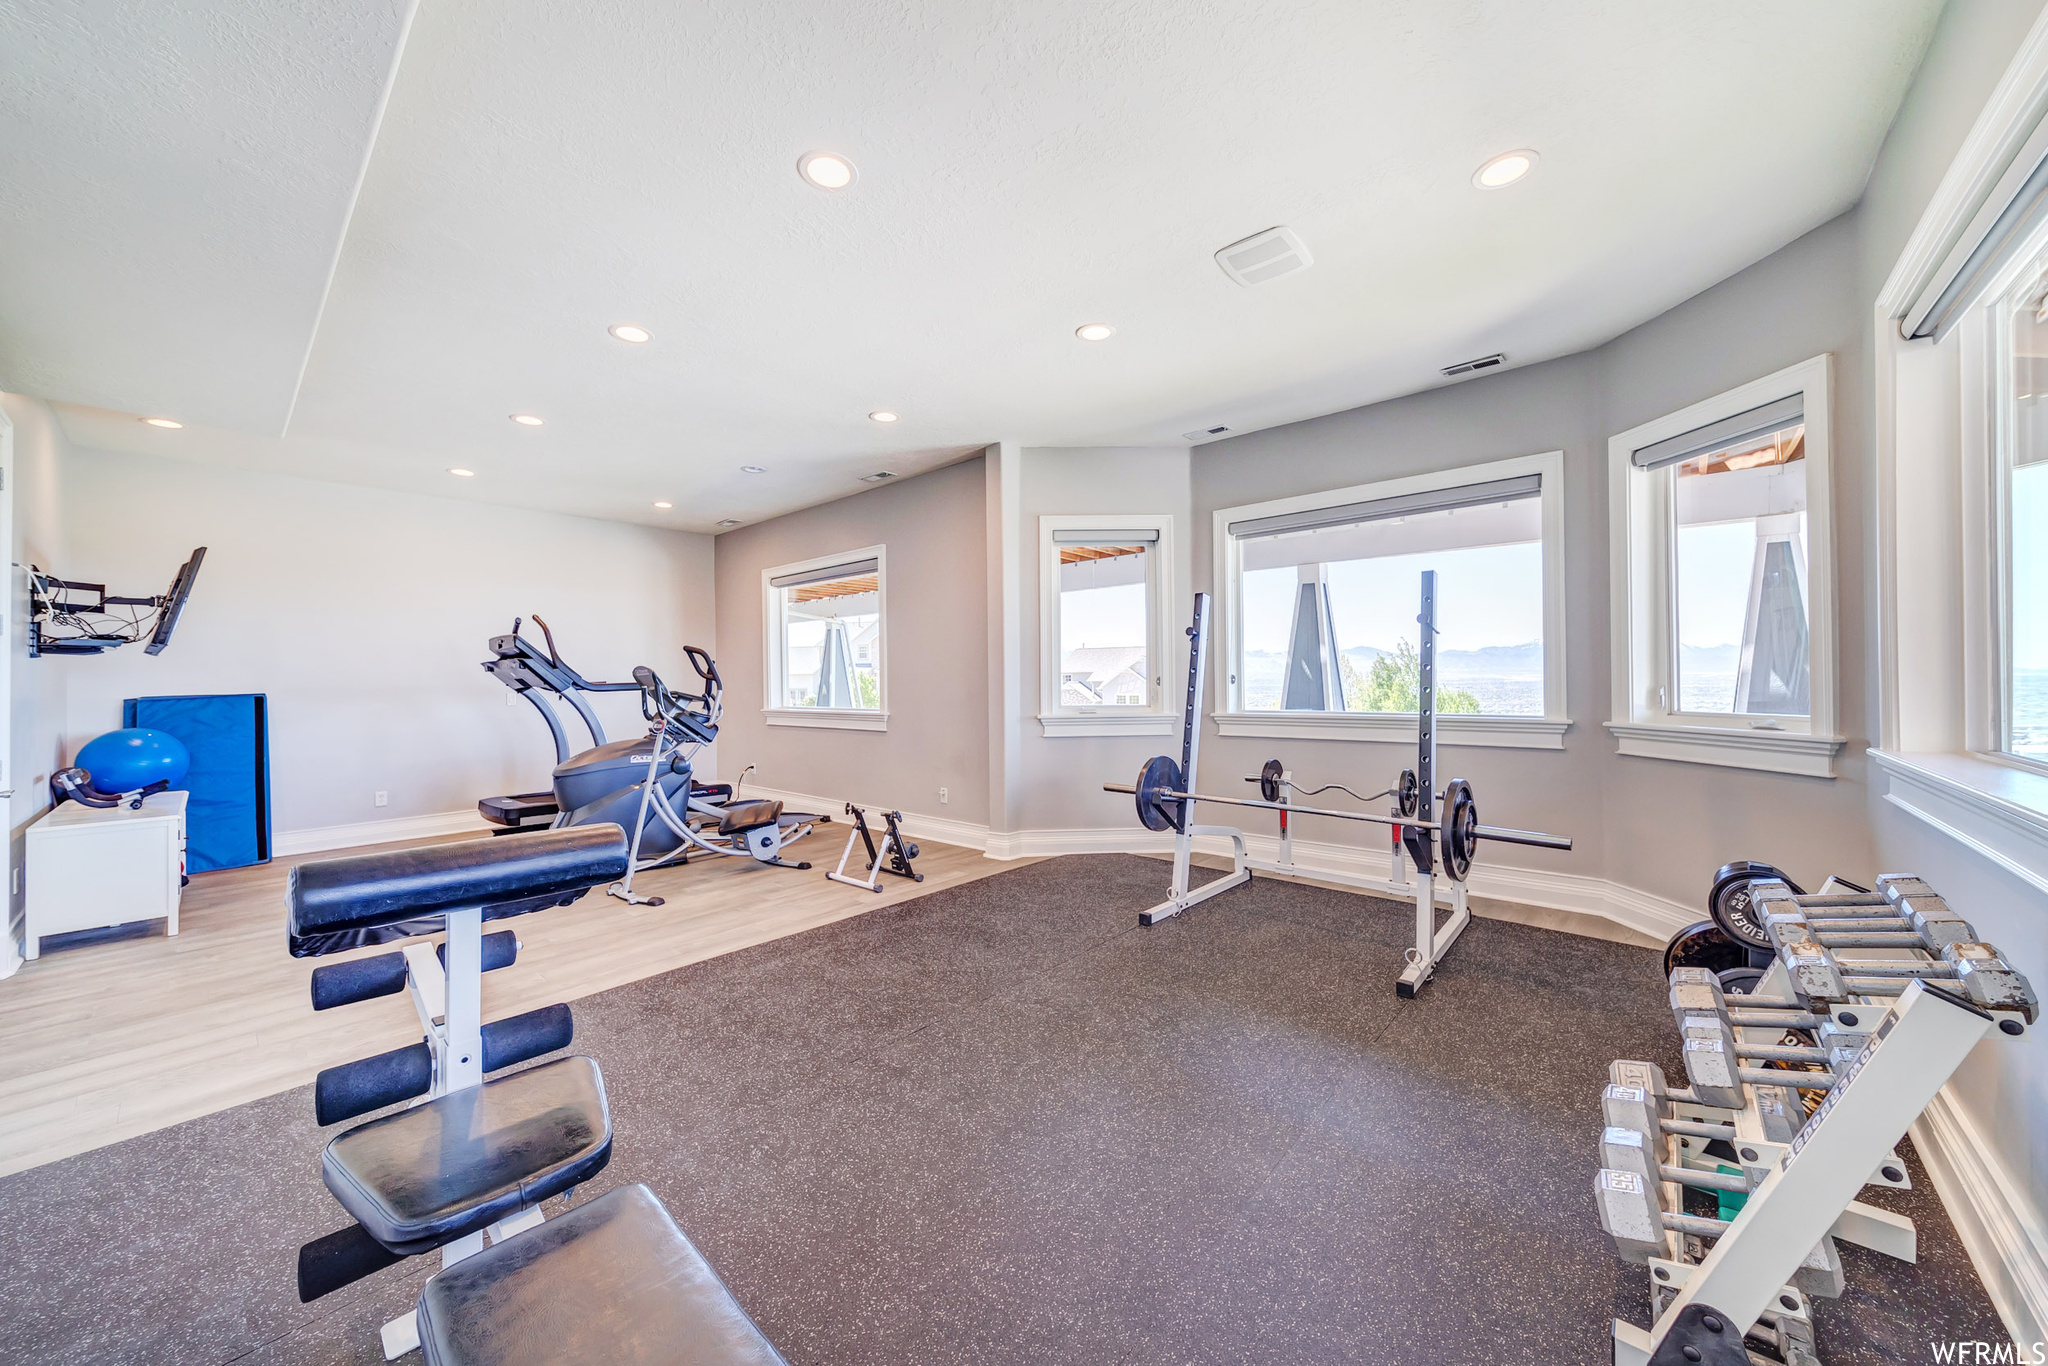 Workout room with panoramic views of the valley.